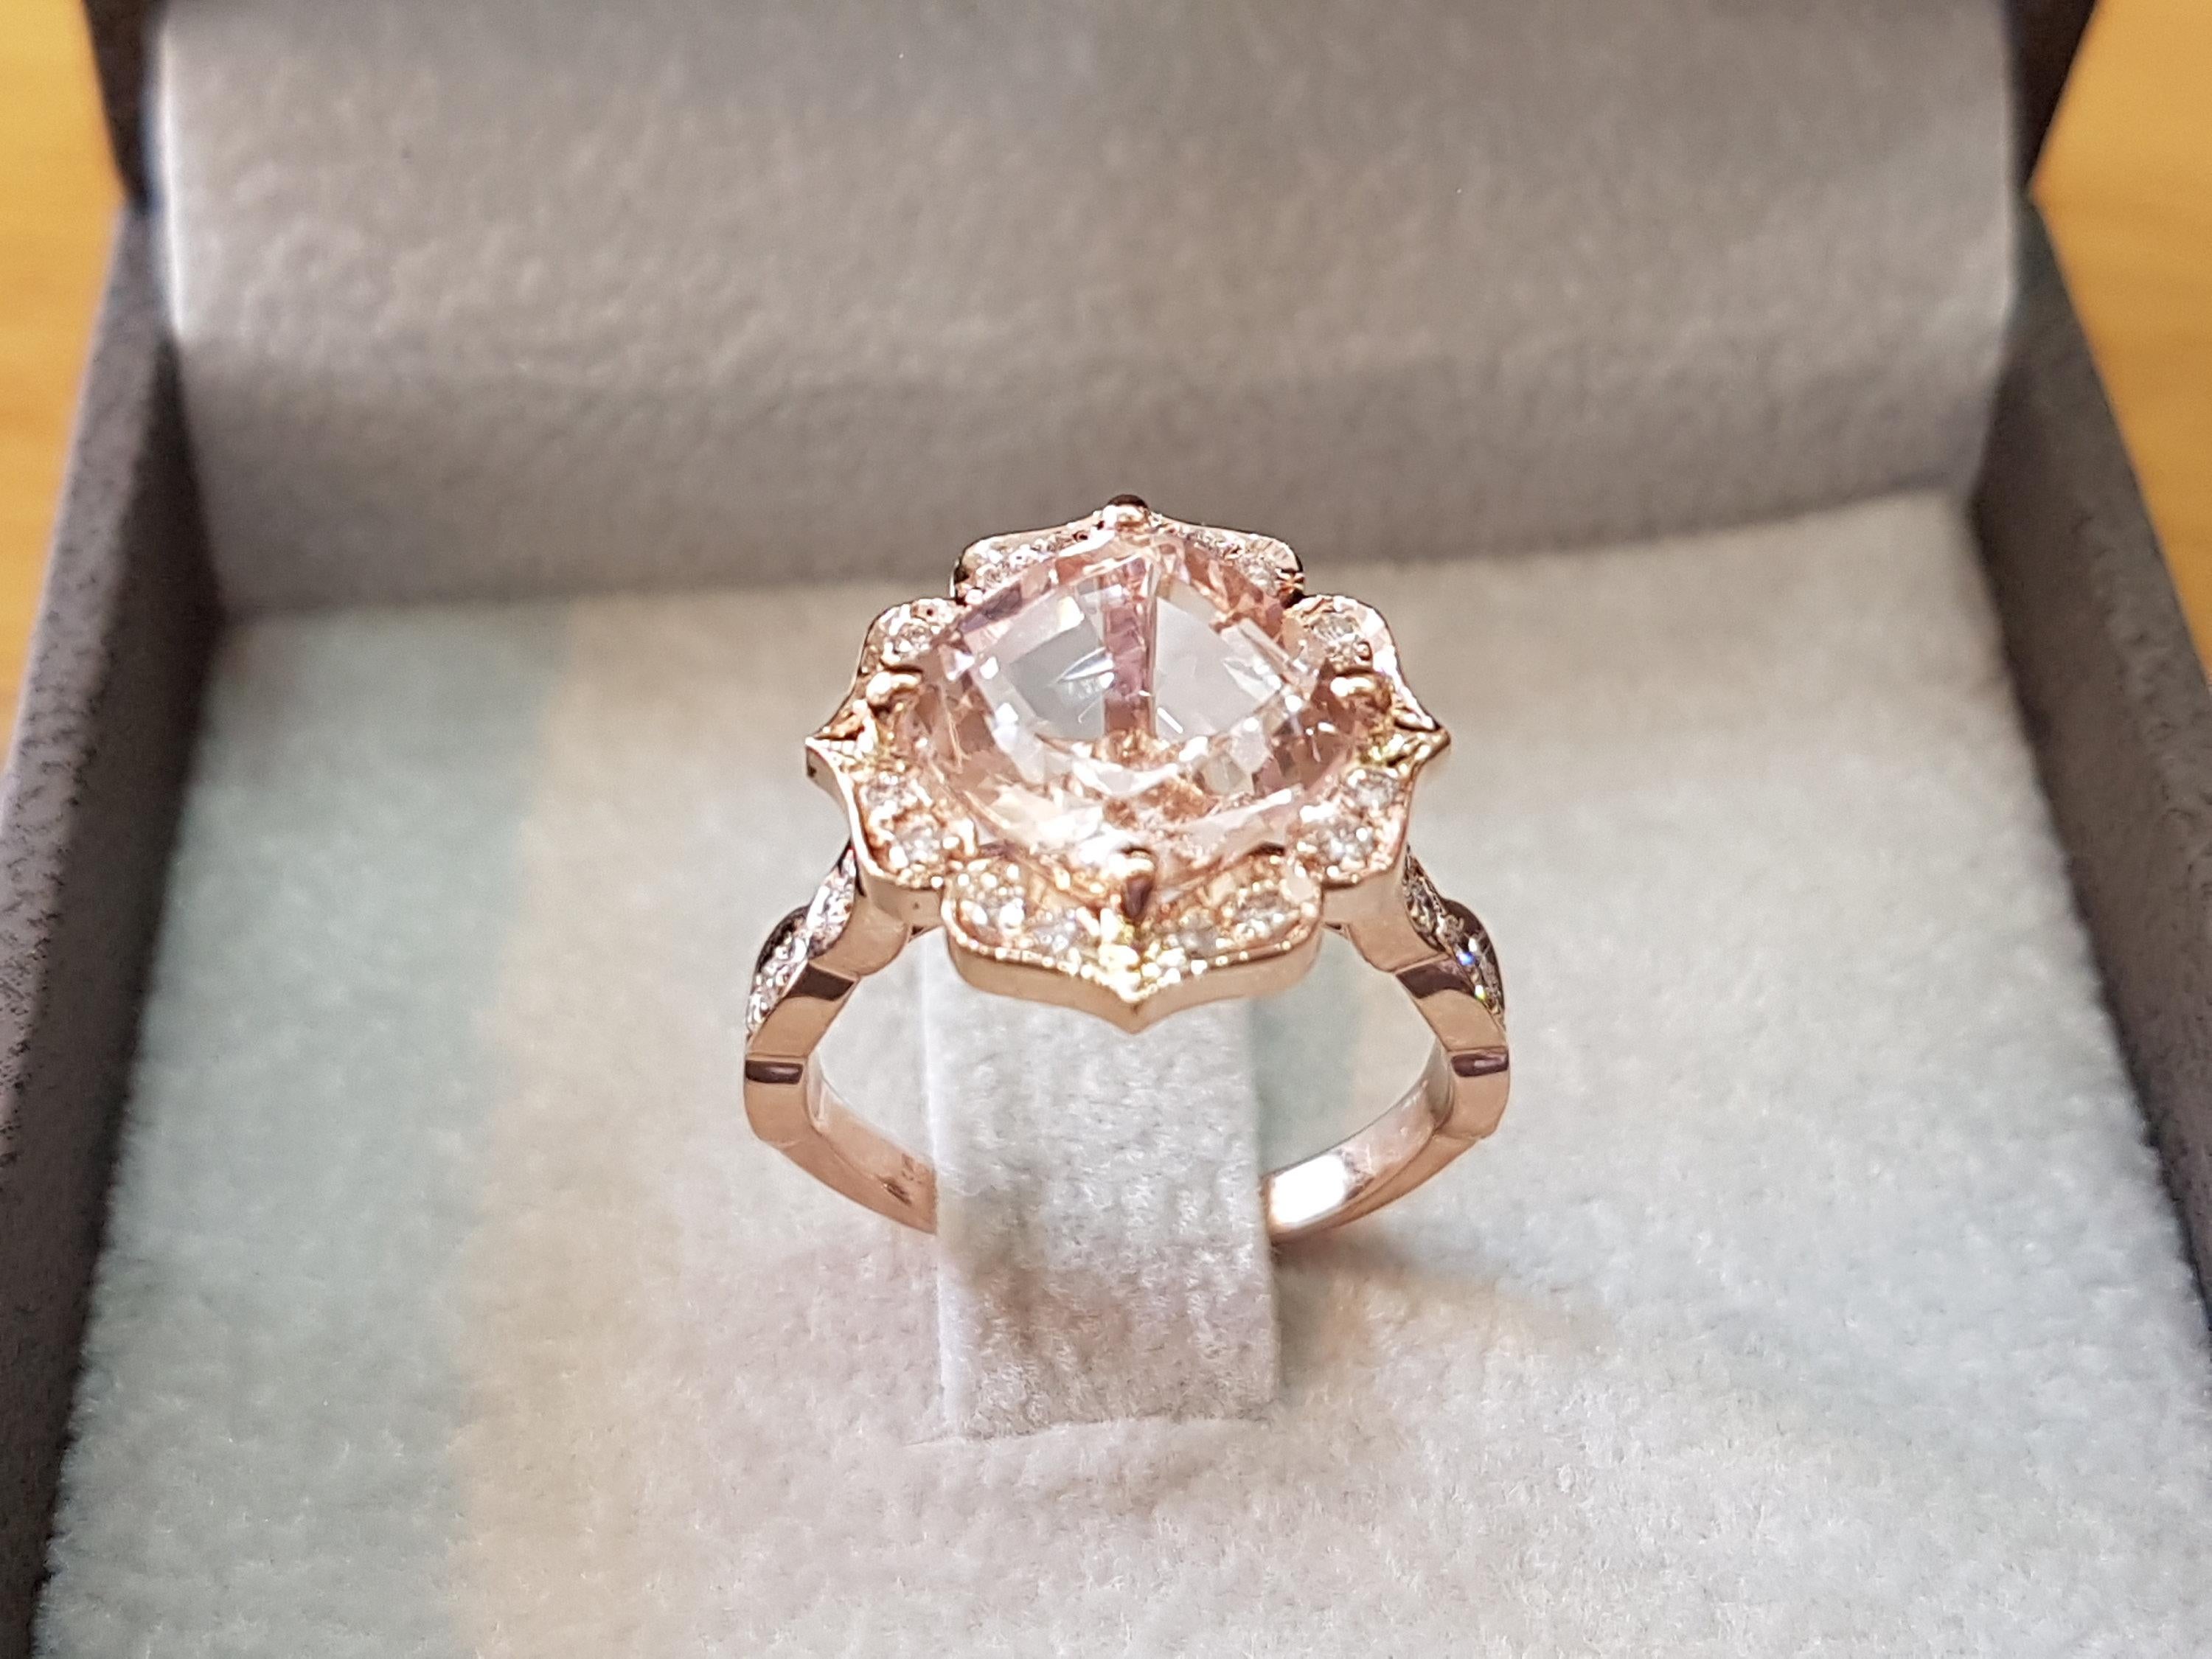 An amazing 9mm pink/peach natural cushion morganite gemstone, adorned by 1/4ctw of white natural diamonds - this ring is a great diamond alternative ring that will draw attention wherever you go.
 Can be a great engagement ring, anniversary or